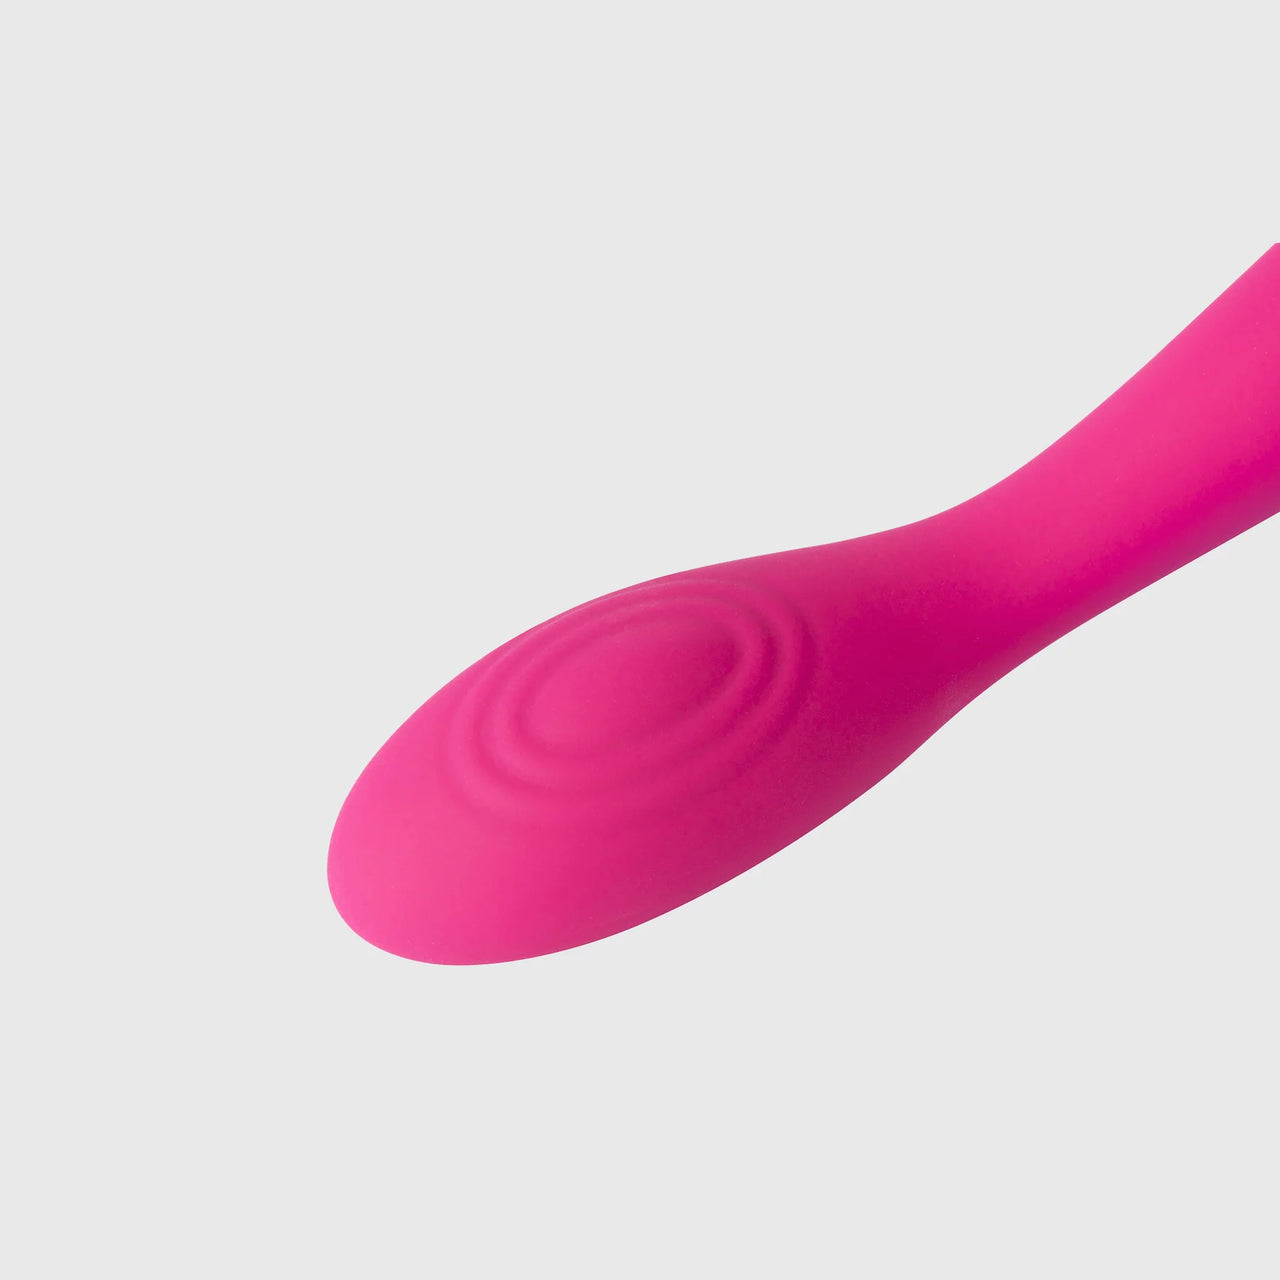 a close up of the tip of a pink vibrator on a white background